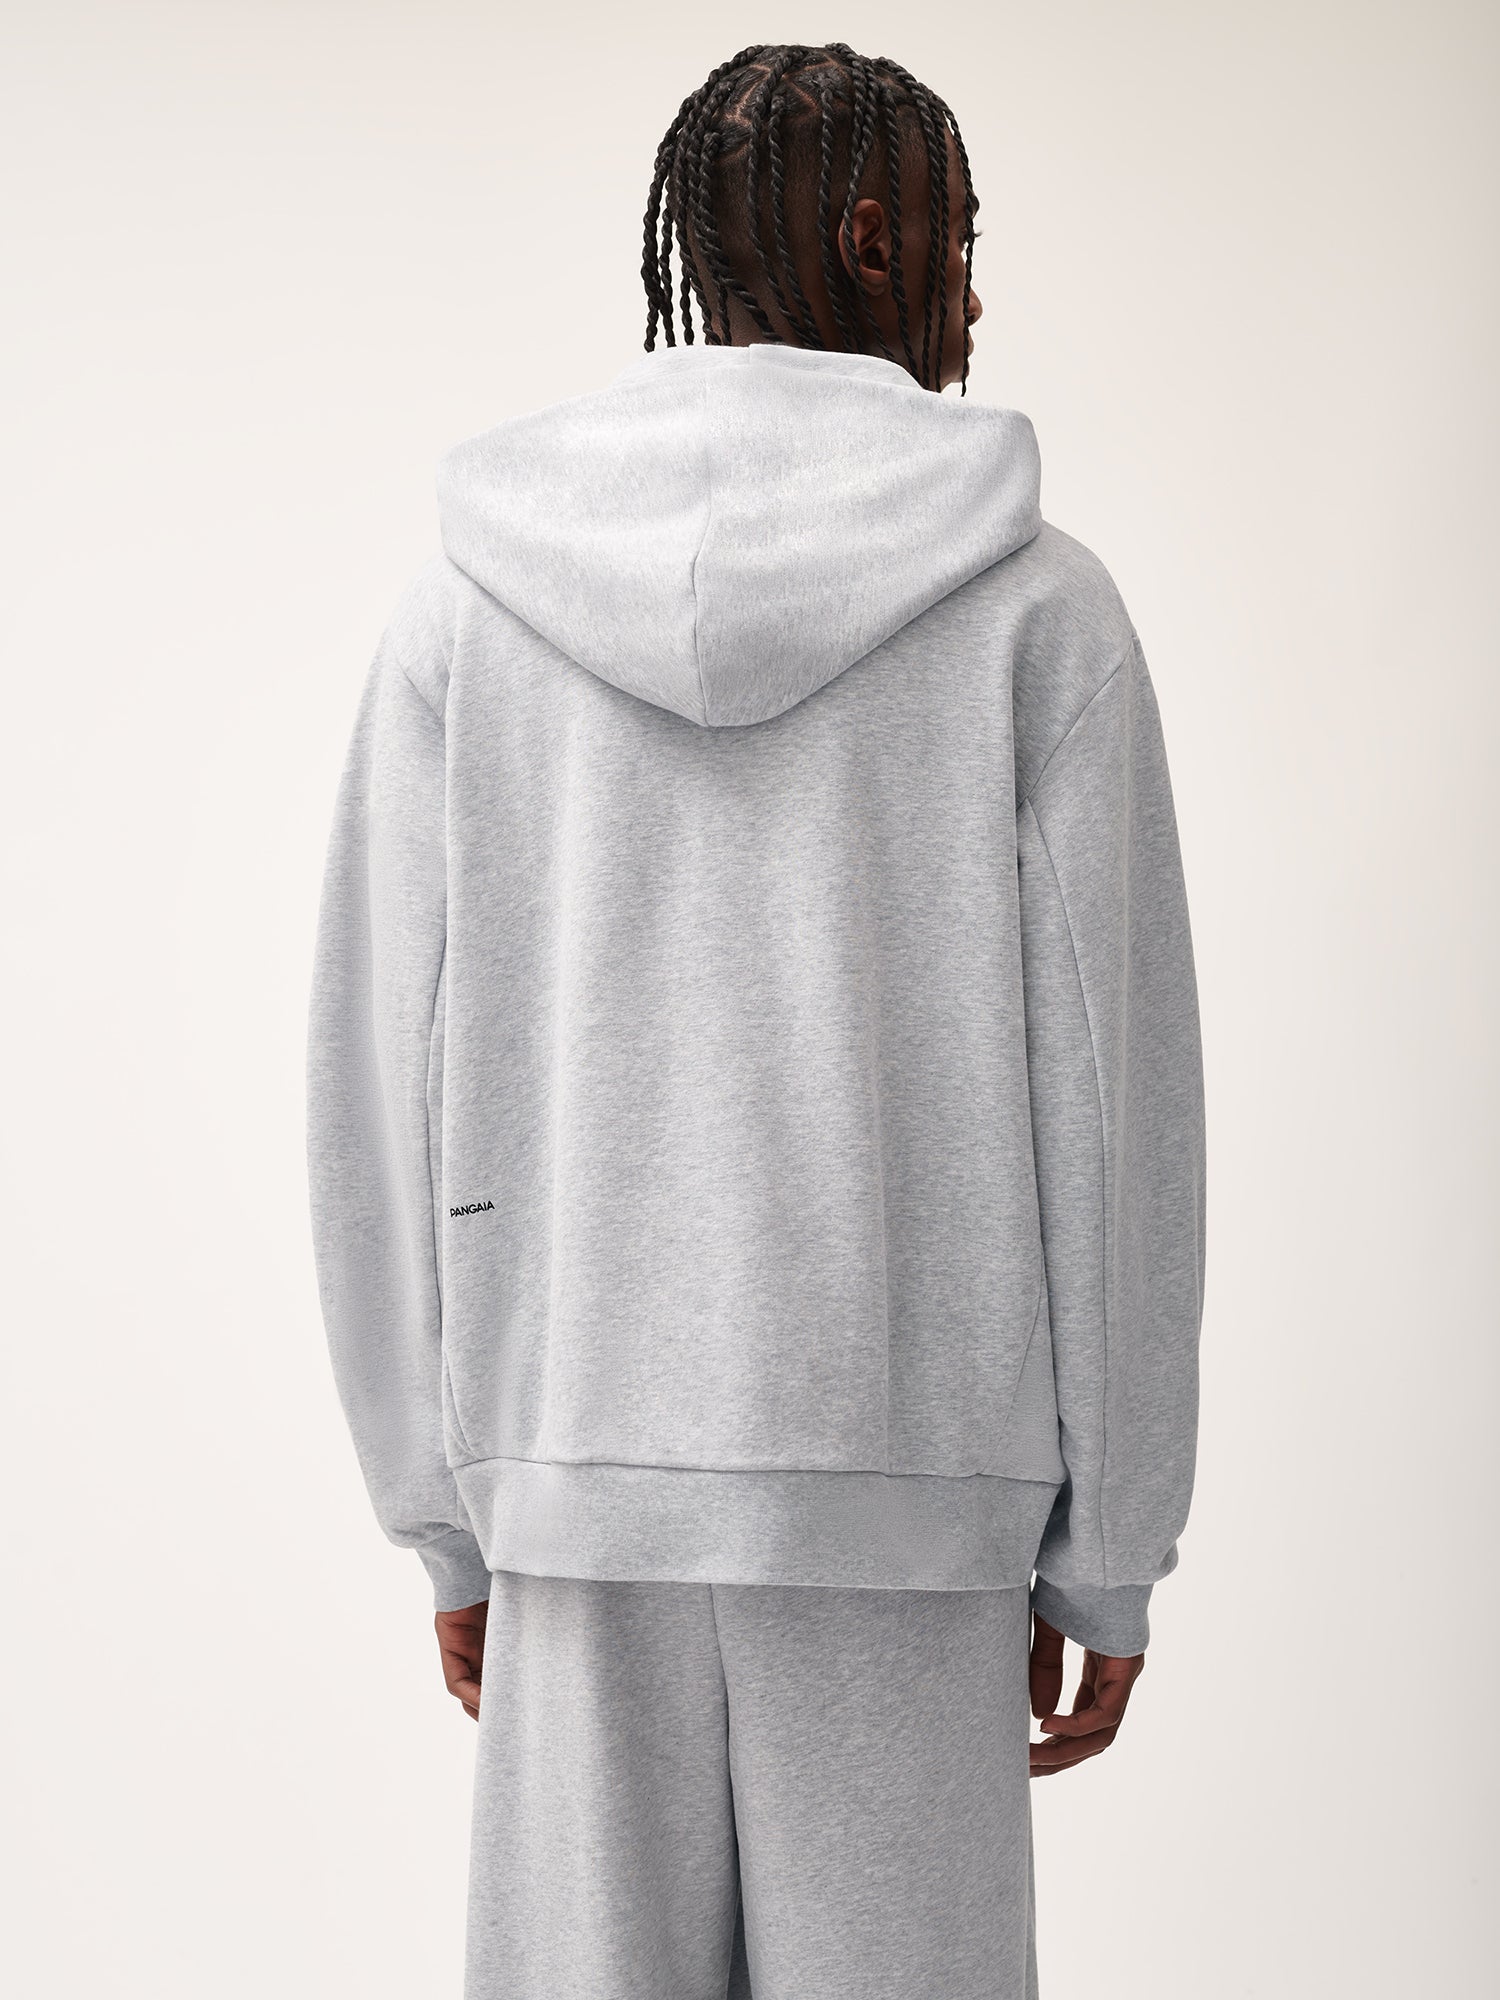 365_Midweight_Snap_Button_Hoodie_Grey_Marl_Male-2